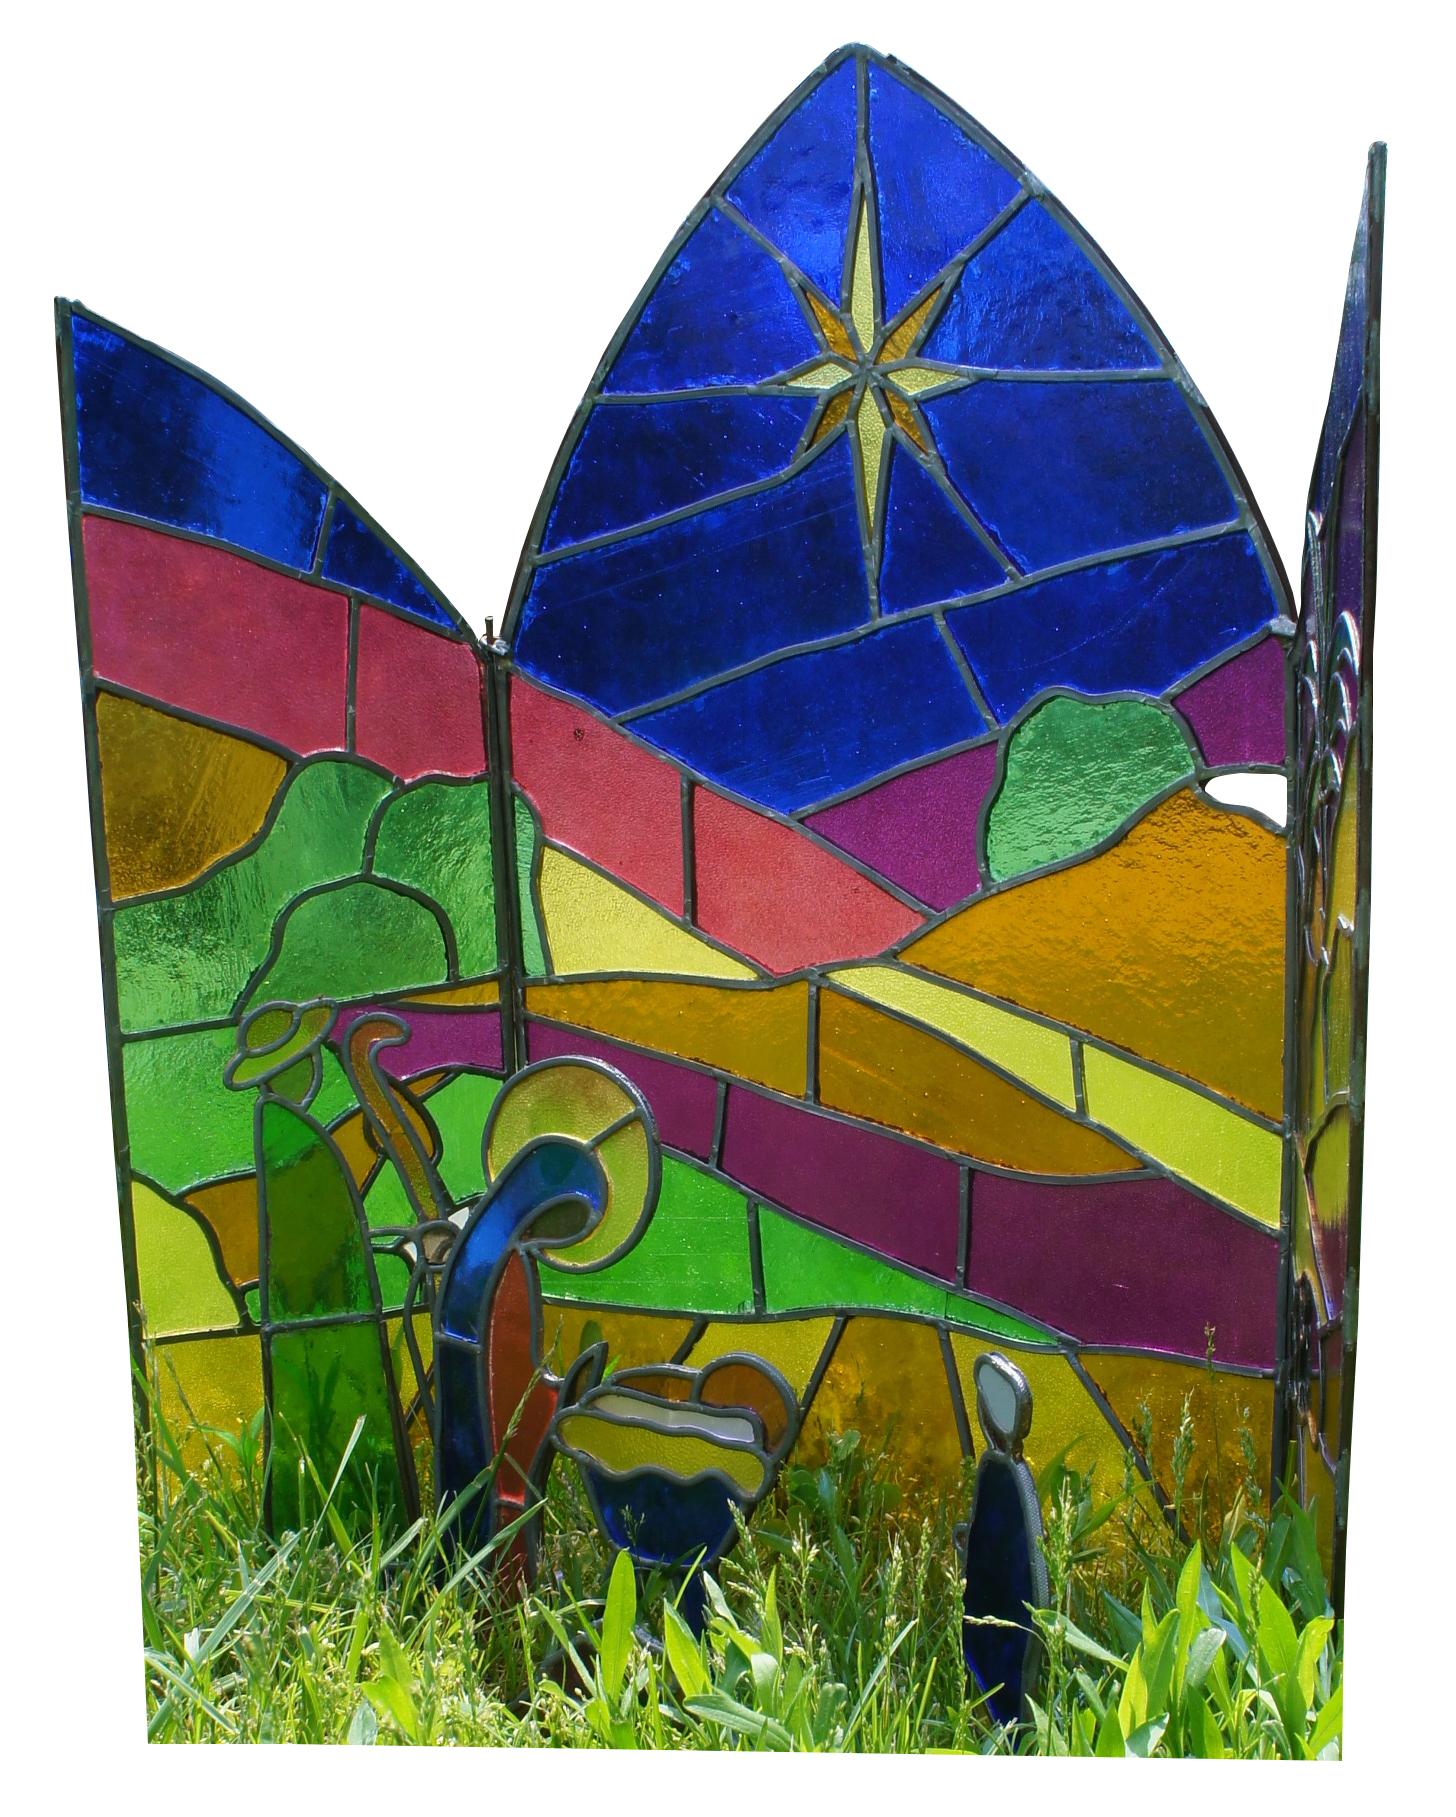 Large vintage stained glass fireplace nativity scene featuring a bright landscape with sun, figures and animals. The screen is set up for outdoor use, and all have small spikes on the bottom.

A nativity scene is a three-dimensional depiction of